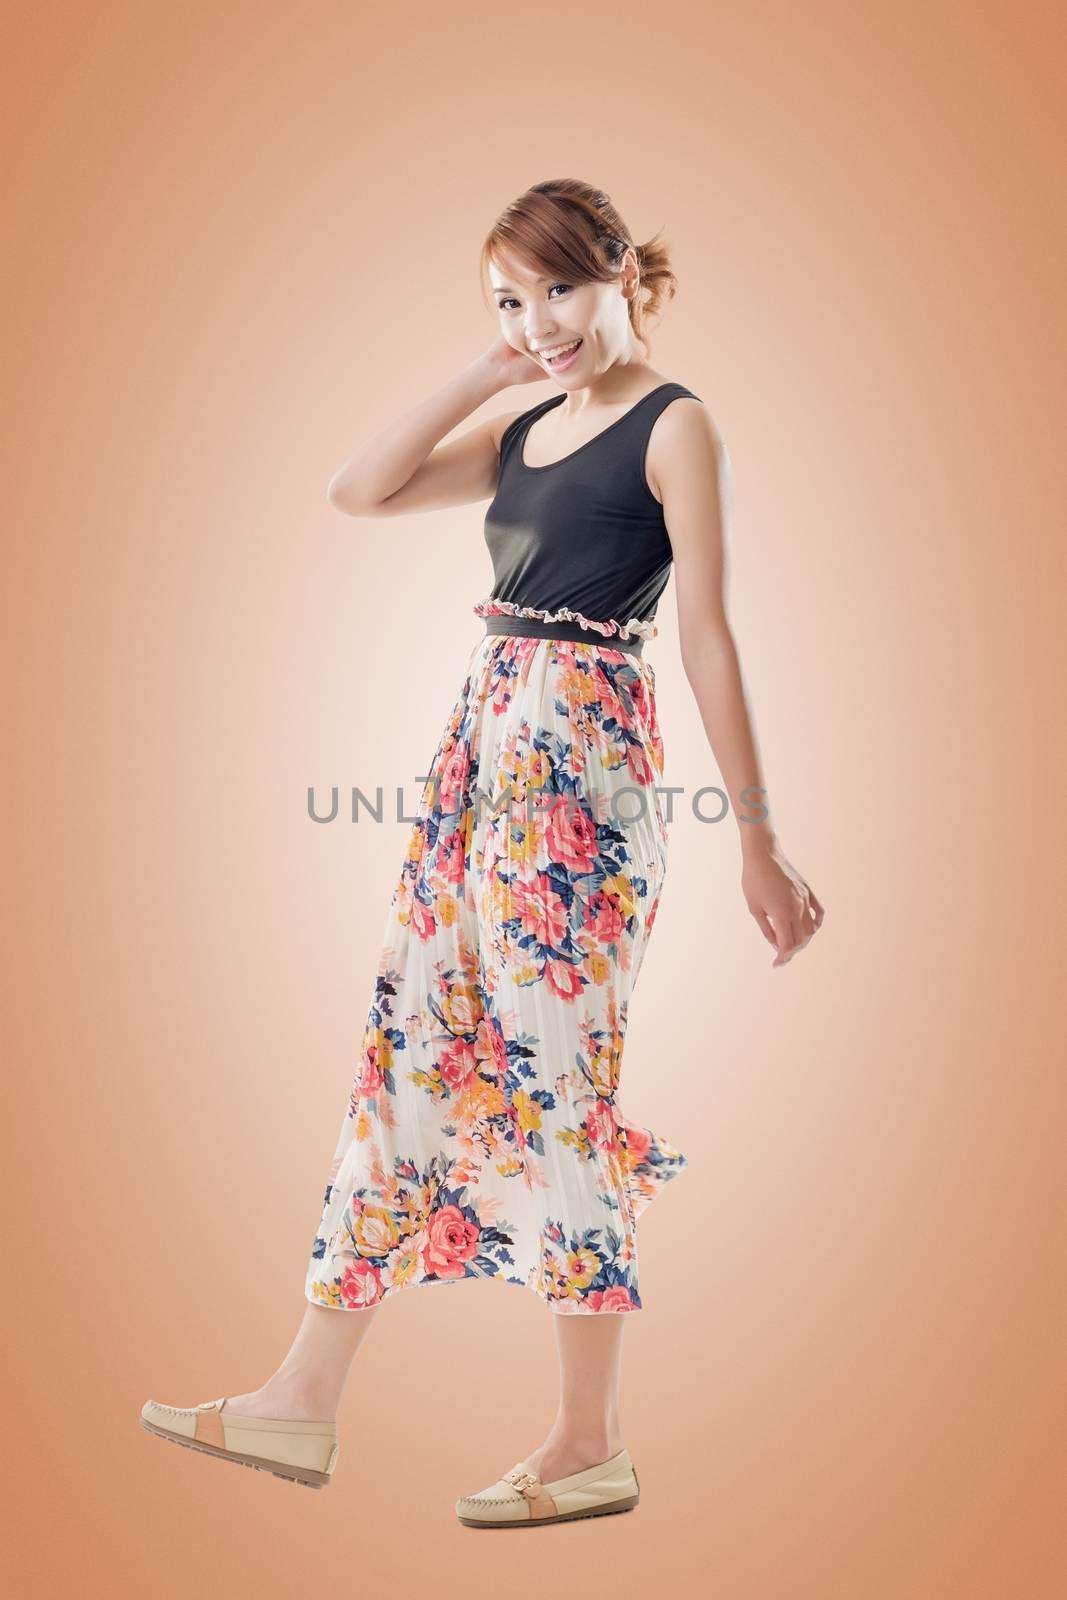 Attractive Asian woman with maxi dresses by elwynn